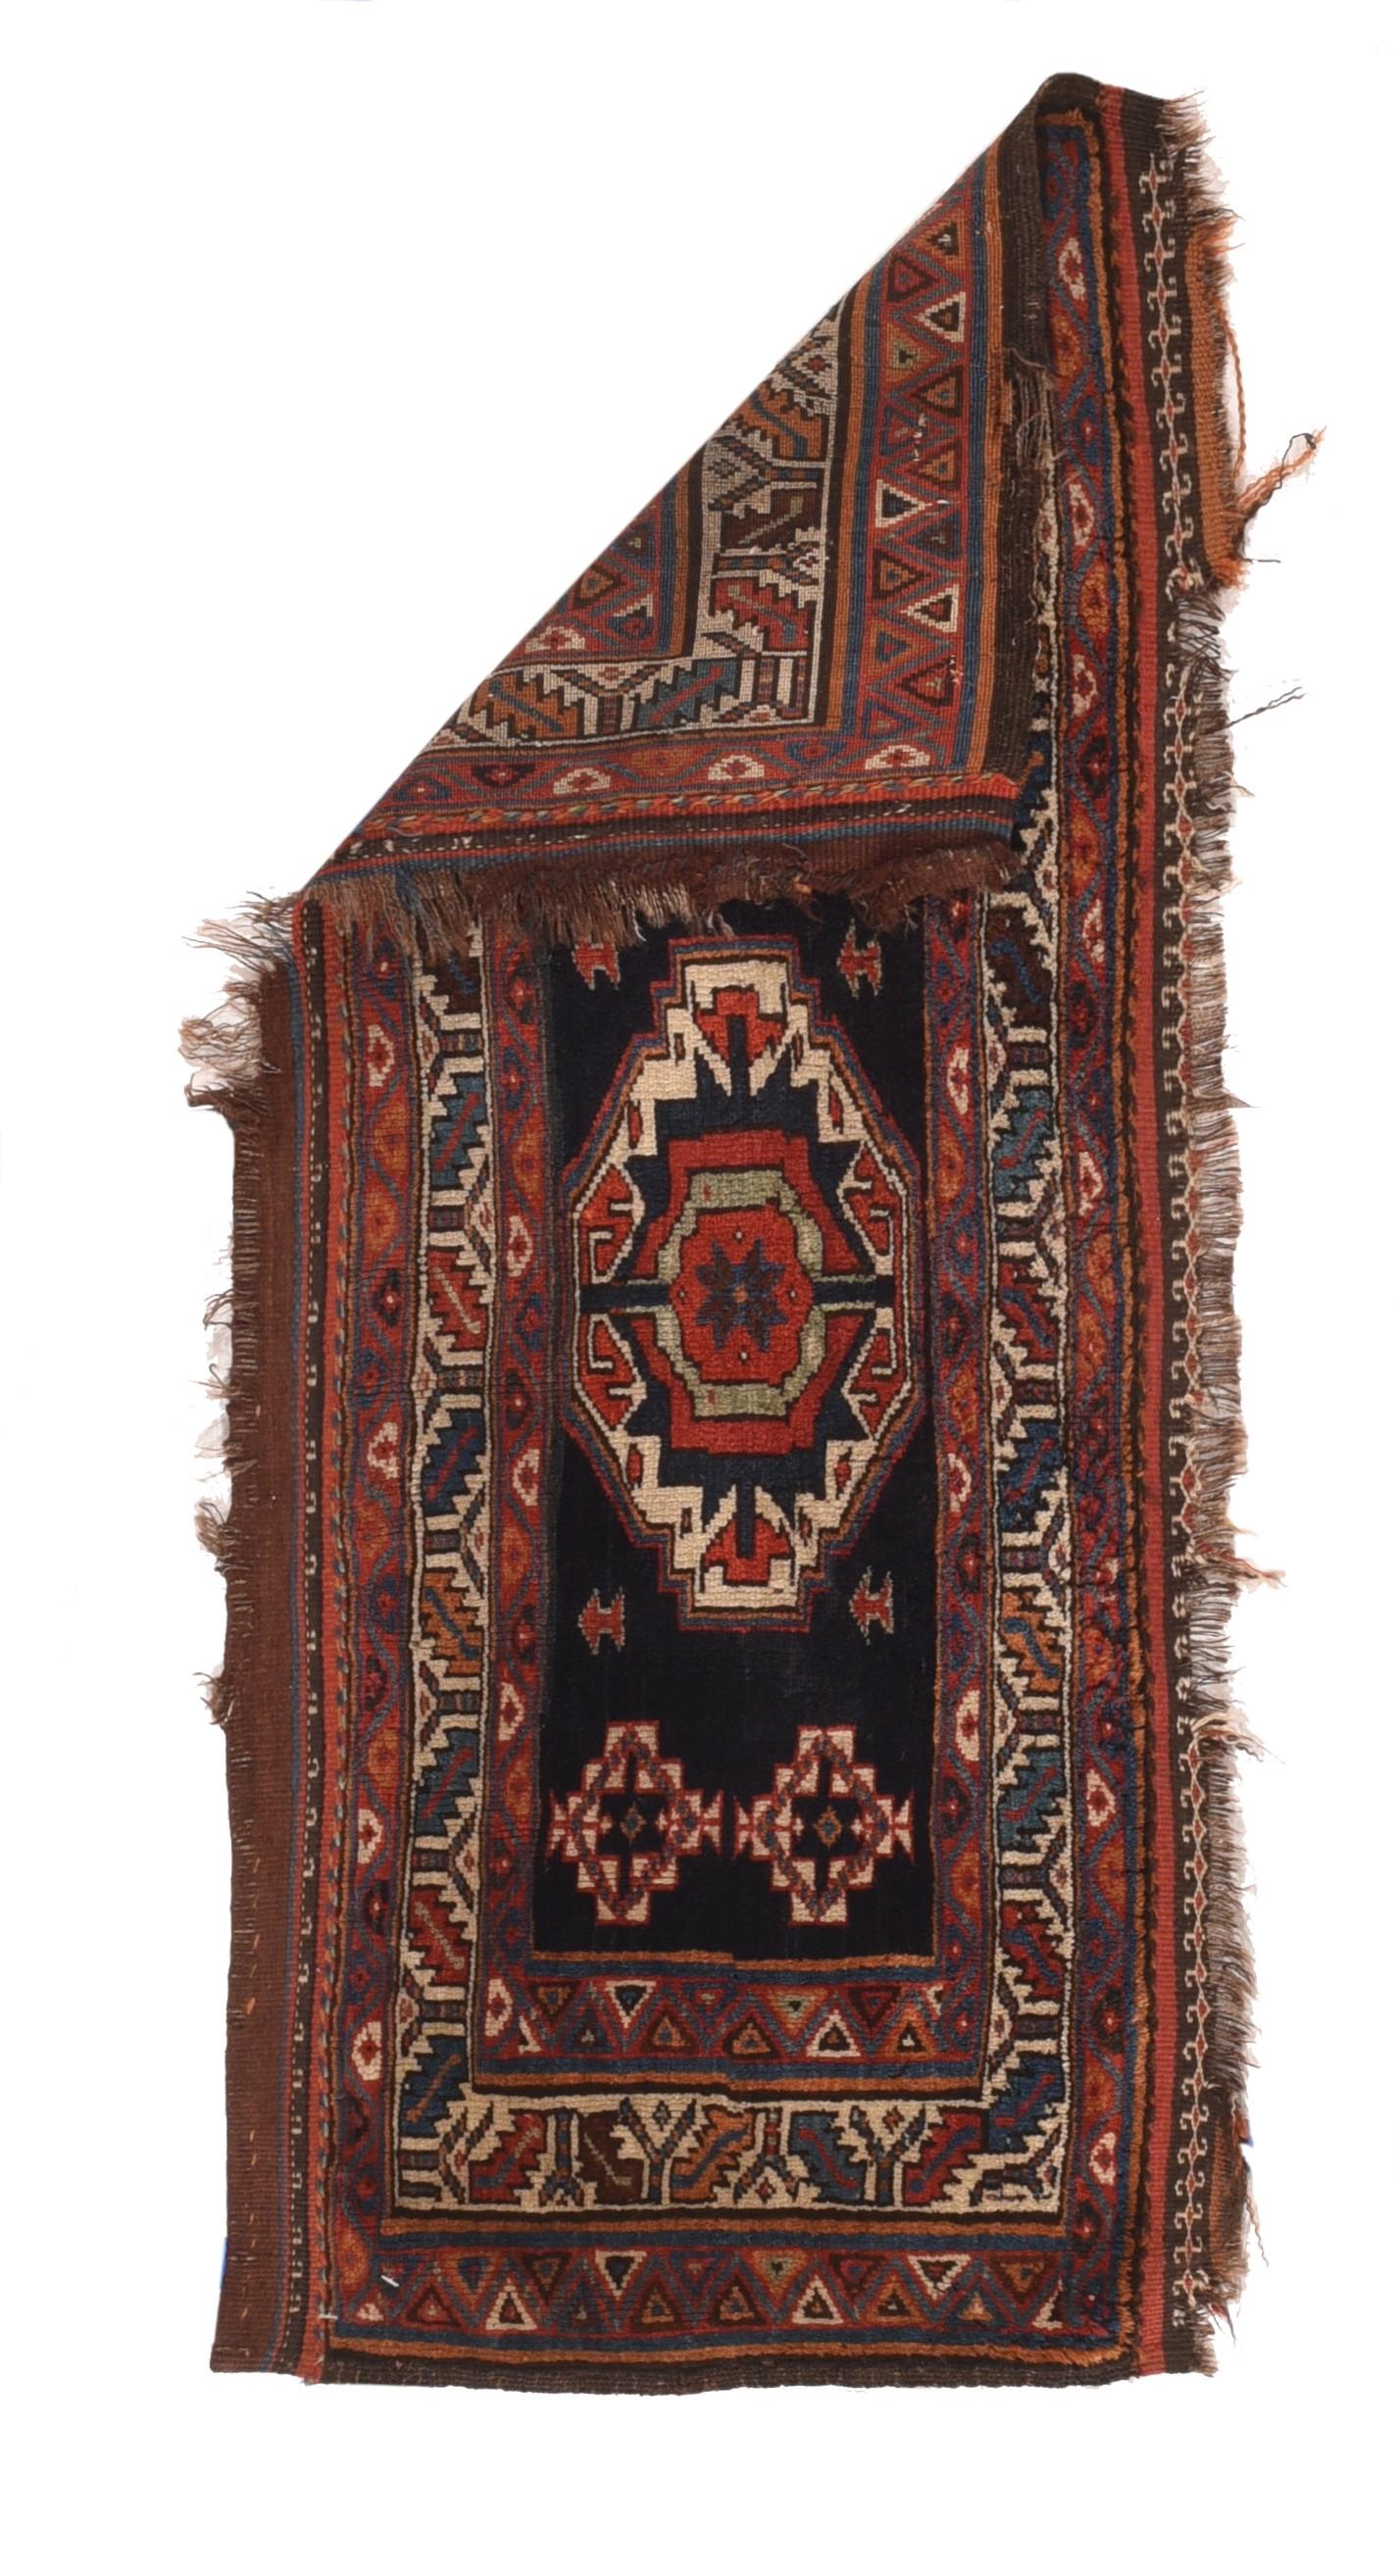 Antique Shashsavan rug 1.6'' x 3.3''. This authentic Central Persian nomadic weaving shows an ecru Tekke Turkmen-style gul on a navy ground with small, stepped ivory corner motives. The main border has an ecru ground with a slanted leaf and simple